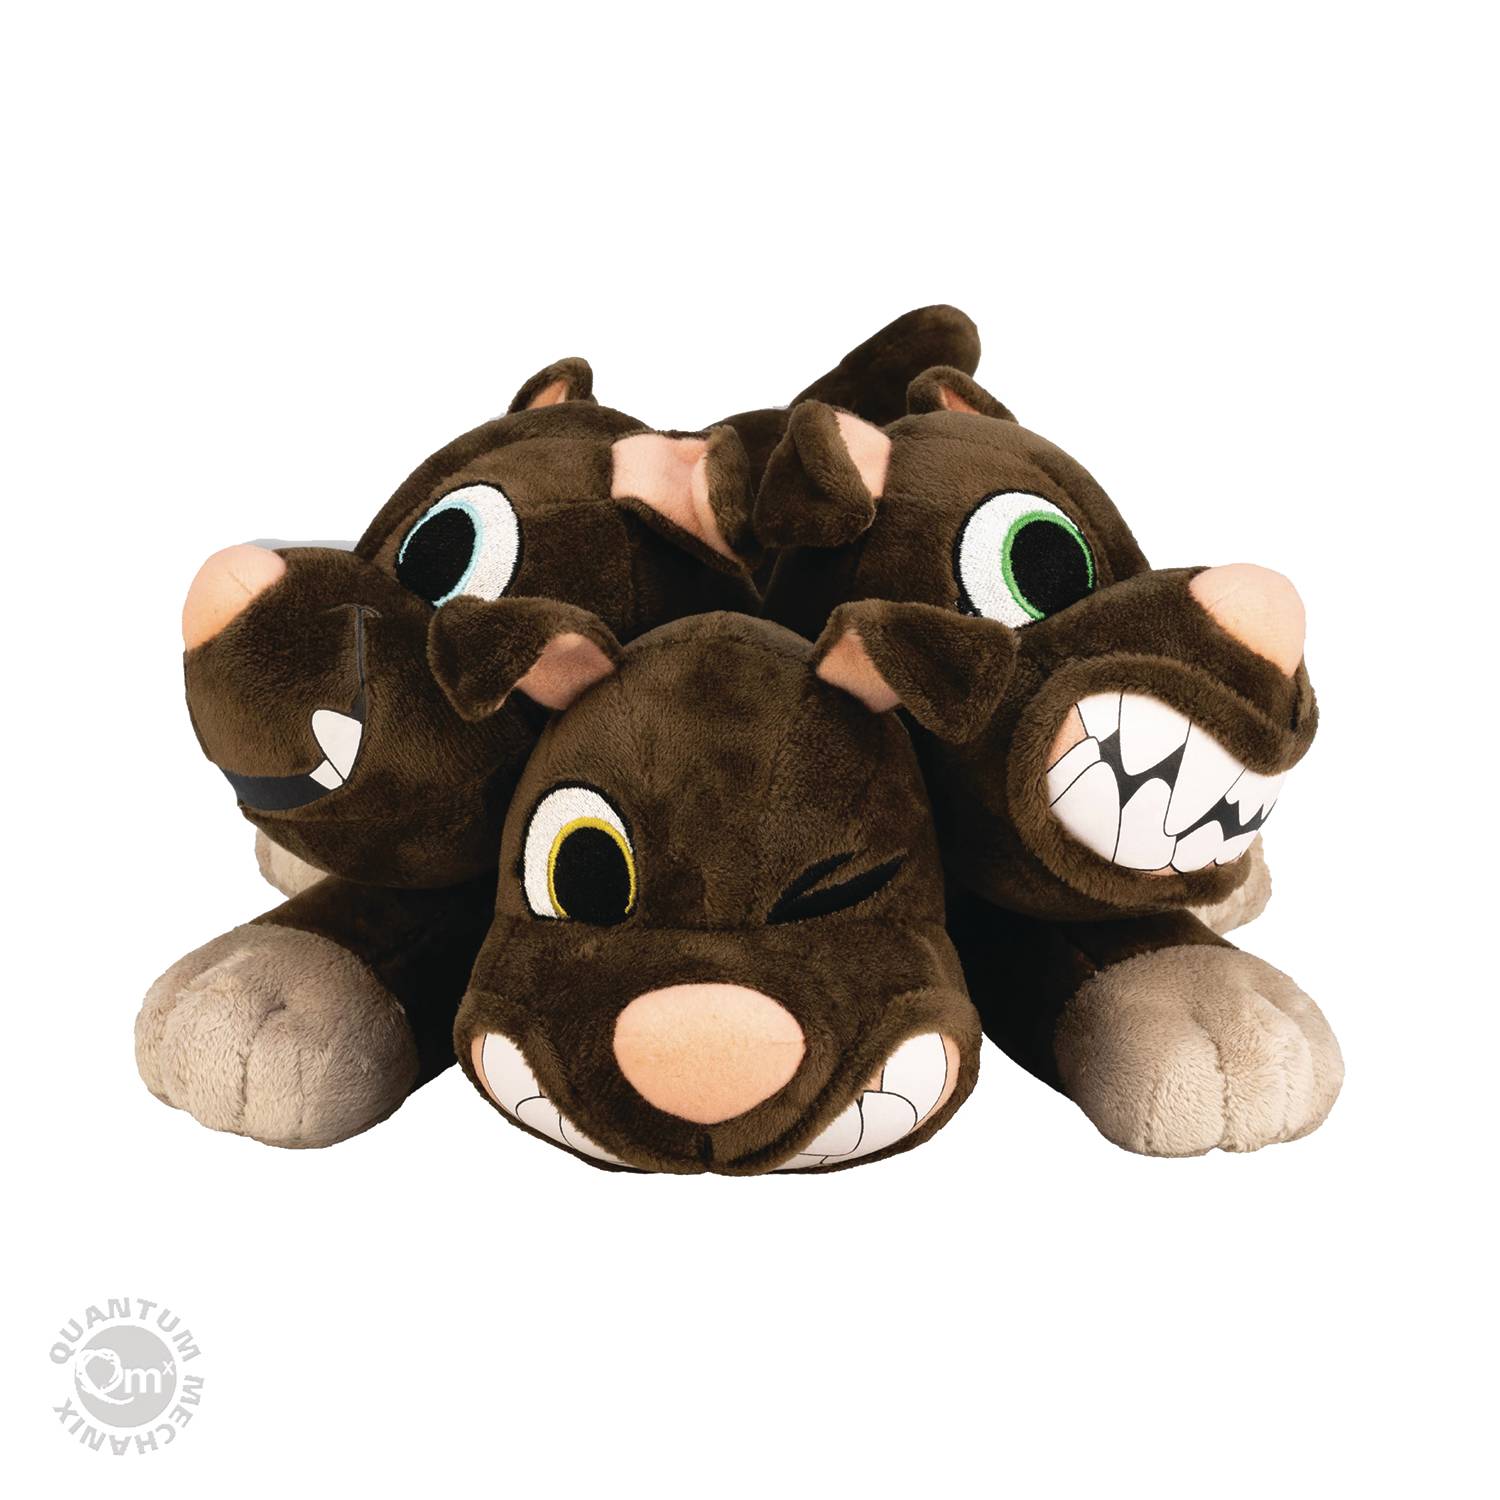 HARRY POTTER FLUFFY QREATURES PLUSH